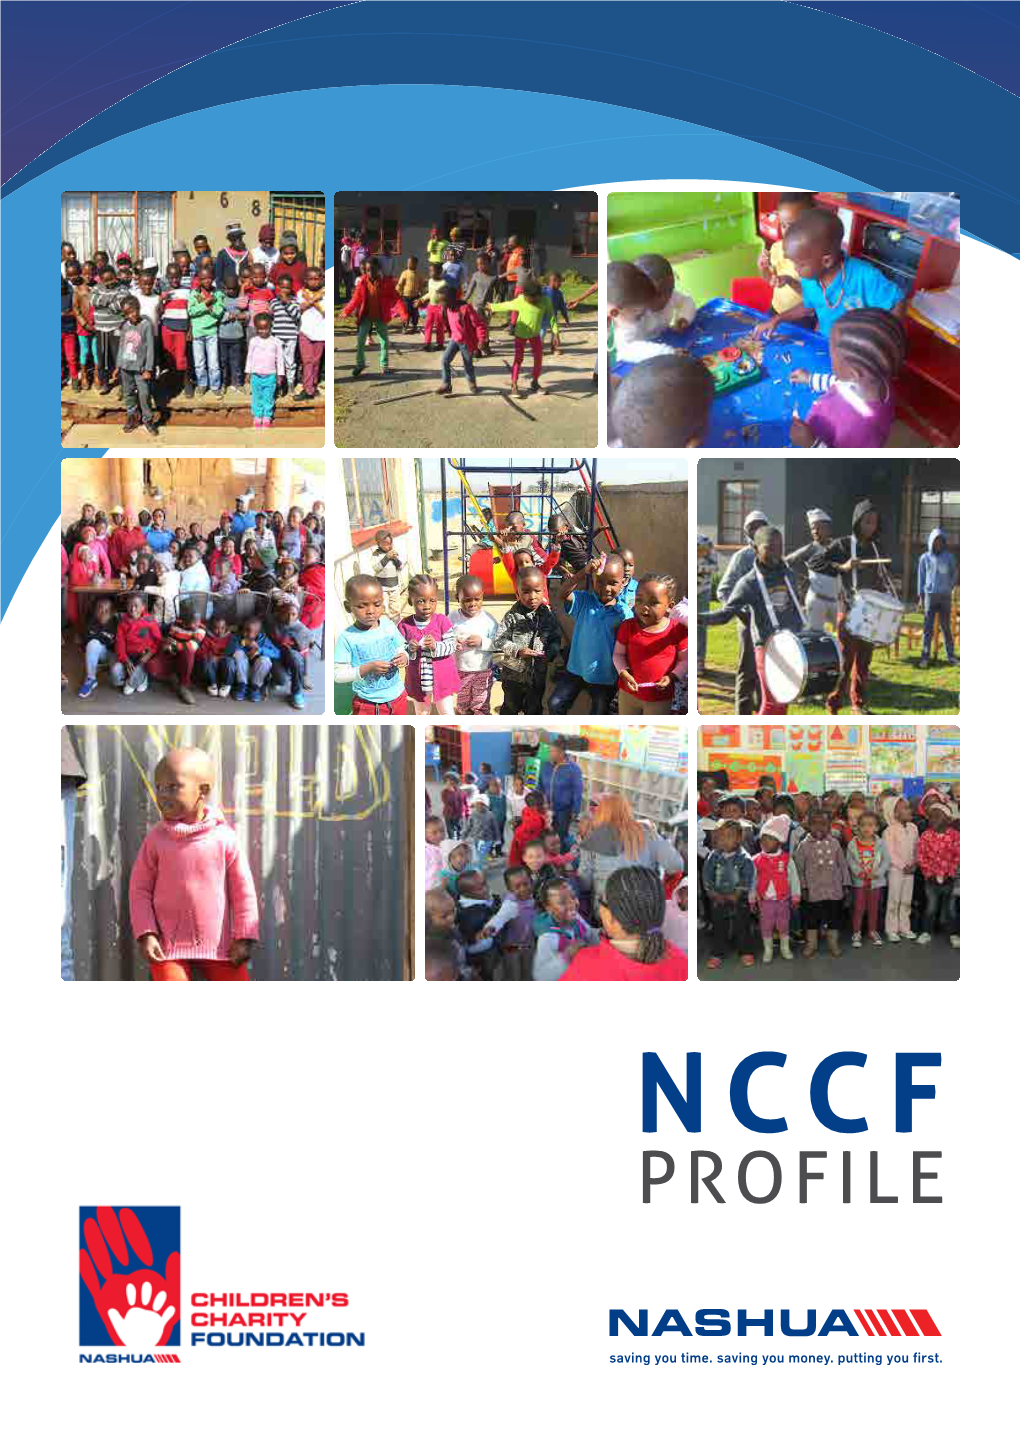 NCCF PROFILE Beyond CSI: an Overview of the Nashua Children’S Charity Foundation